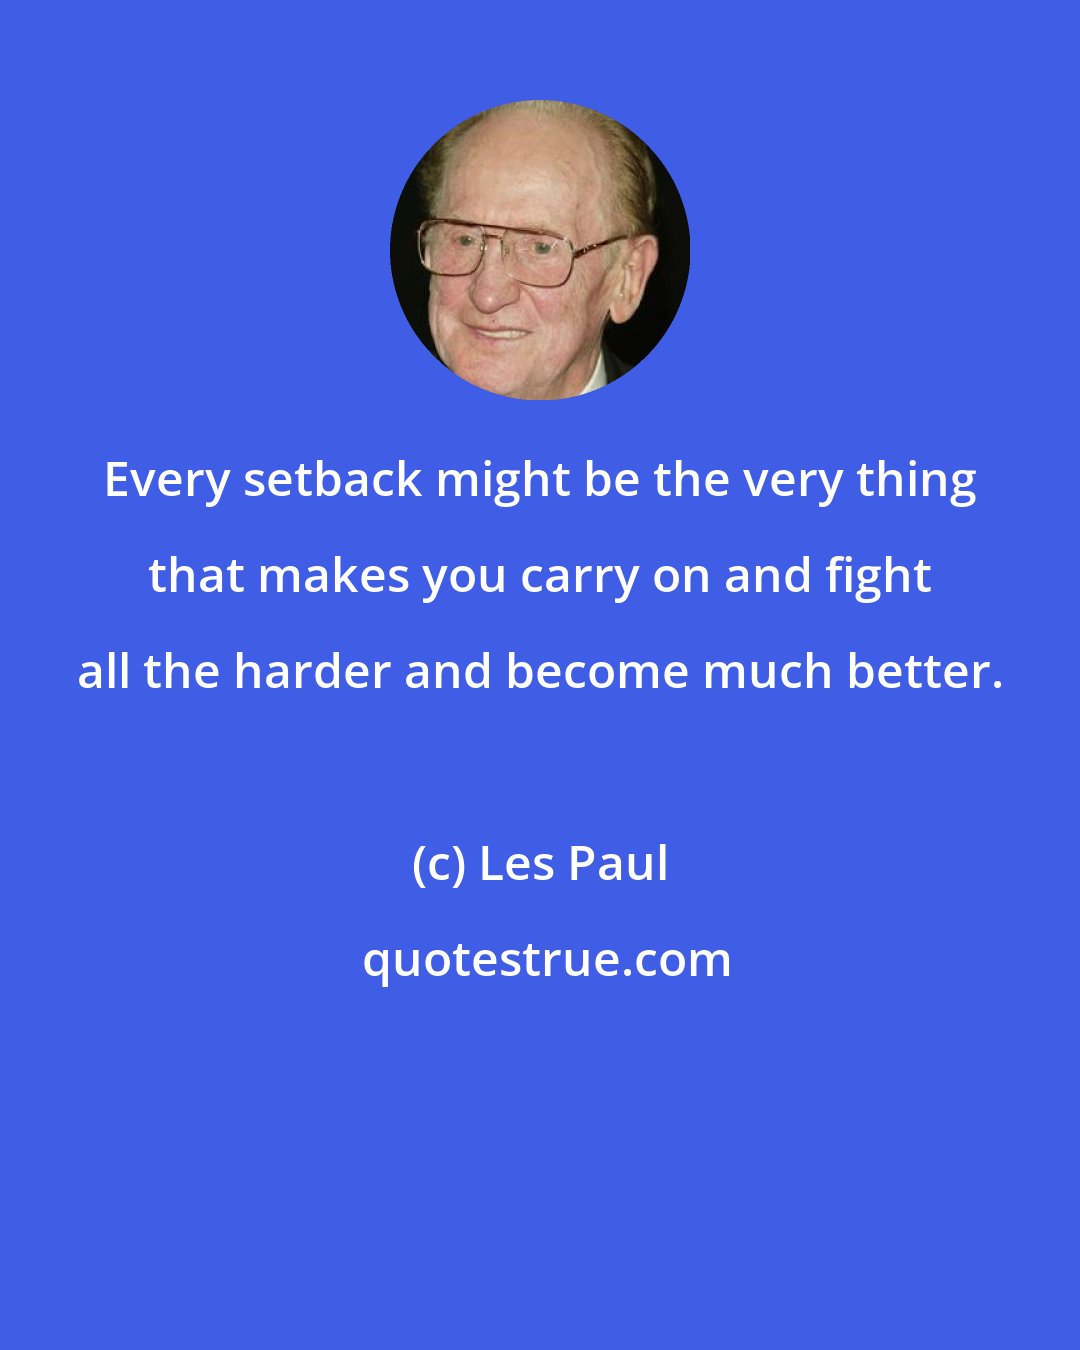 Les Paul: Every setback might be the very thing that makes you carry on and fight all the harder and become much better.